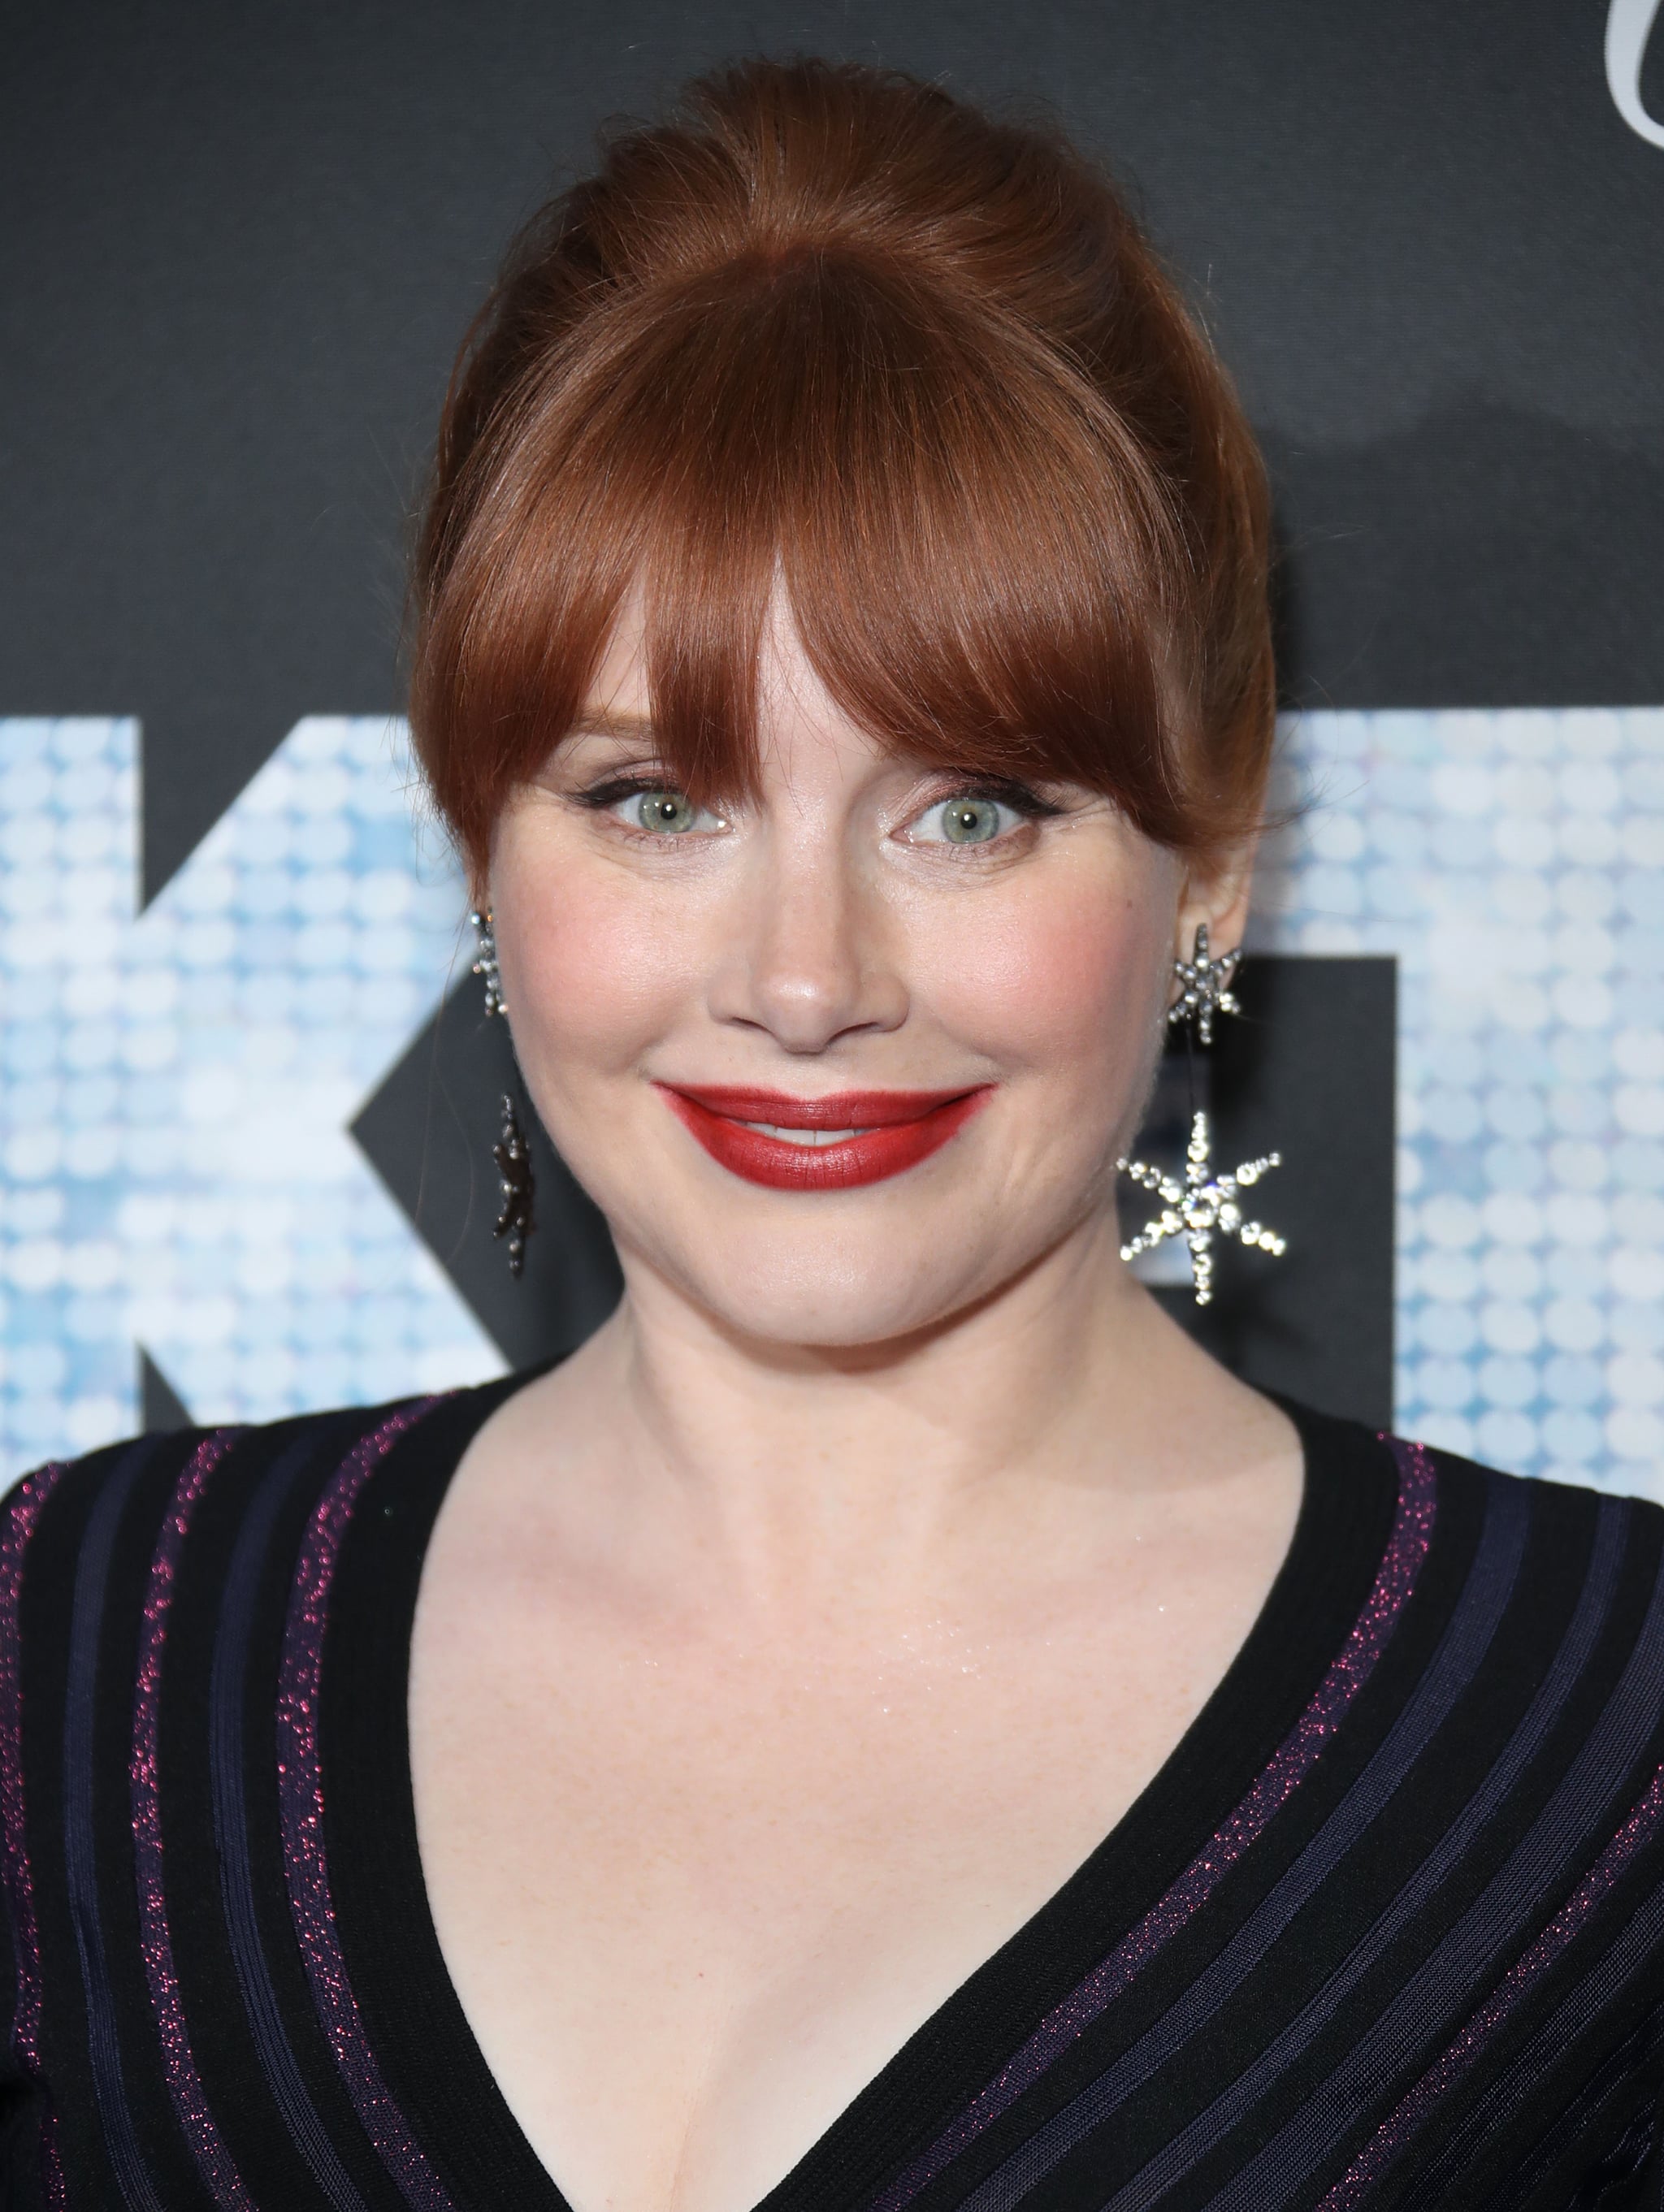 Bryce Dallas Howard Check Out All The New And Familiar Faces Joining The Cast For Jurassic World 3 Popsugar Entertainment Photo 6